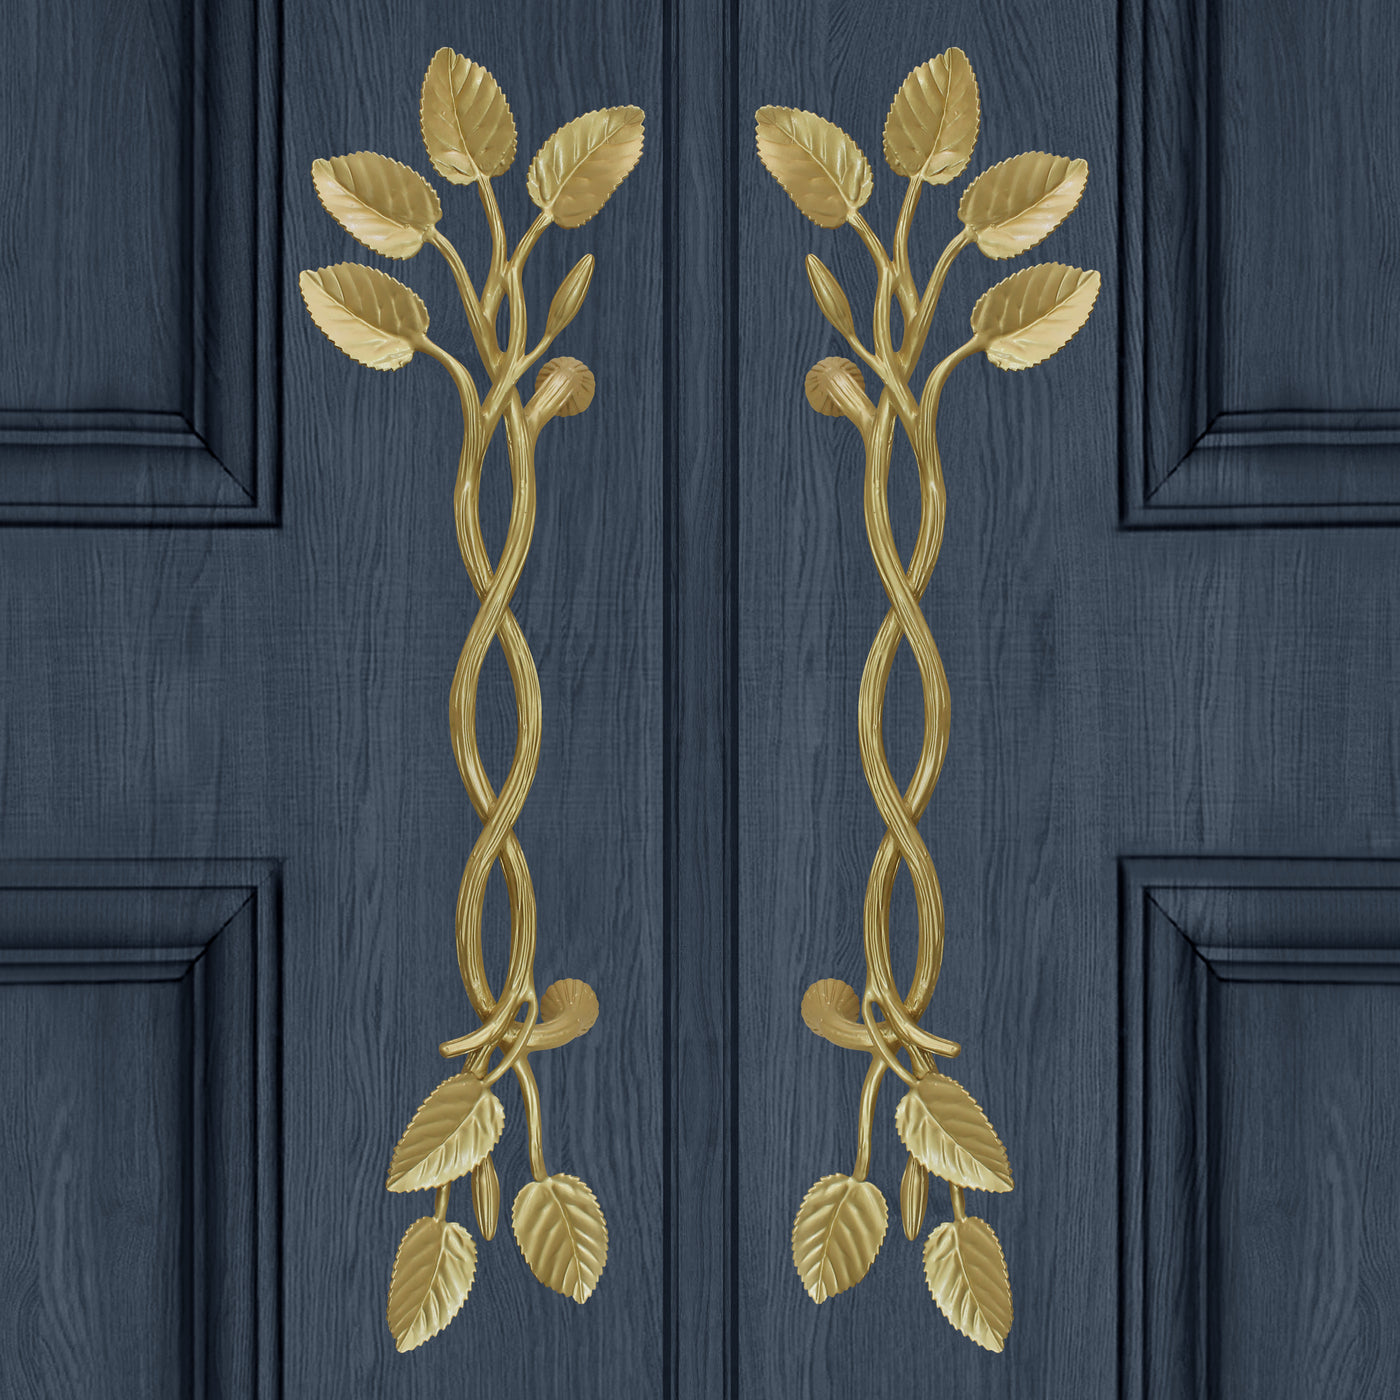 A pair of large  golden decorative pull handles inspired by branches, leaves and buds mounted on a closed wooden door